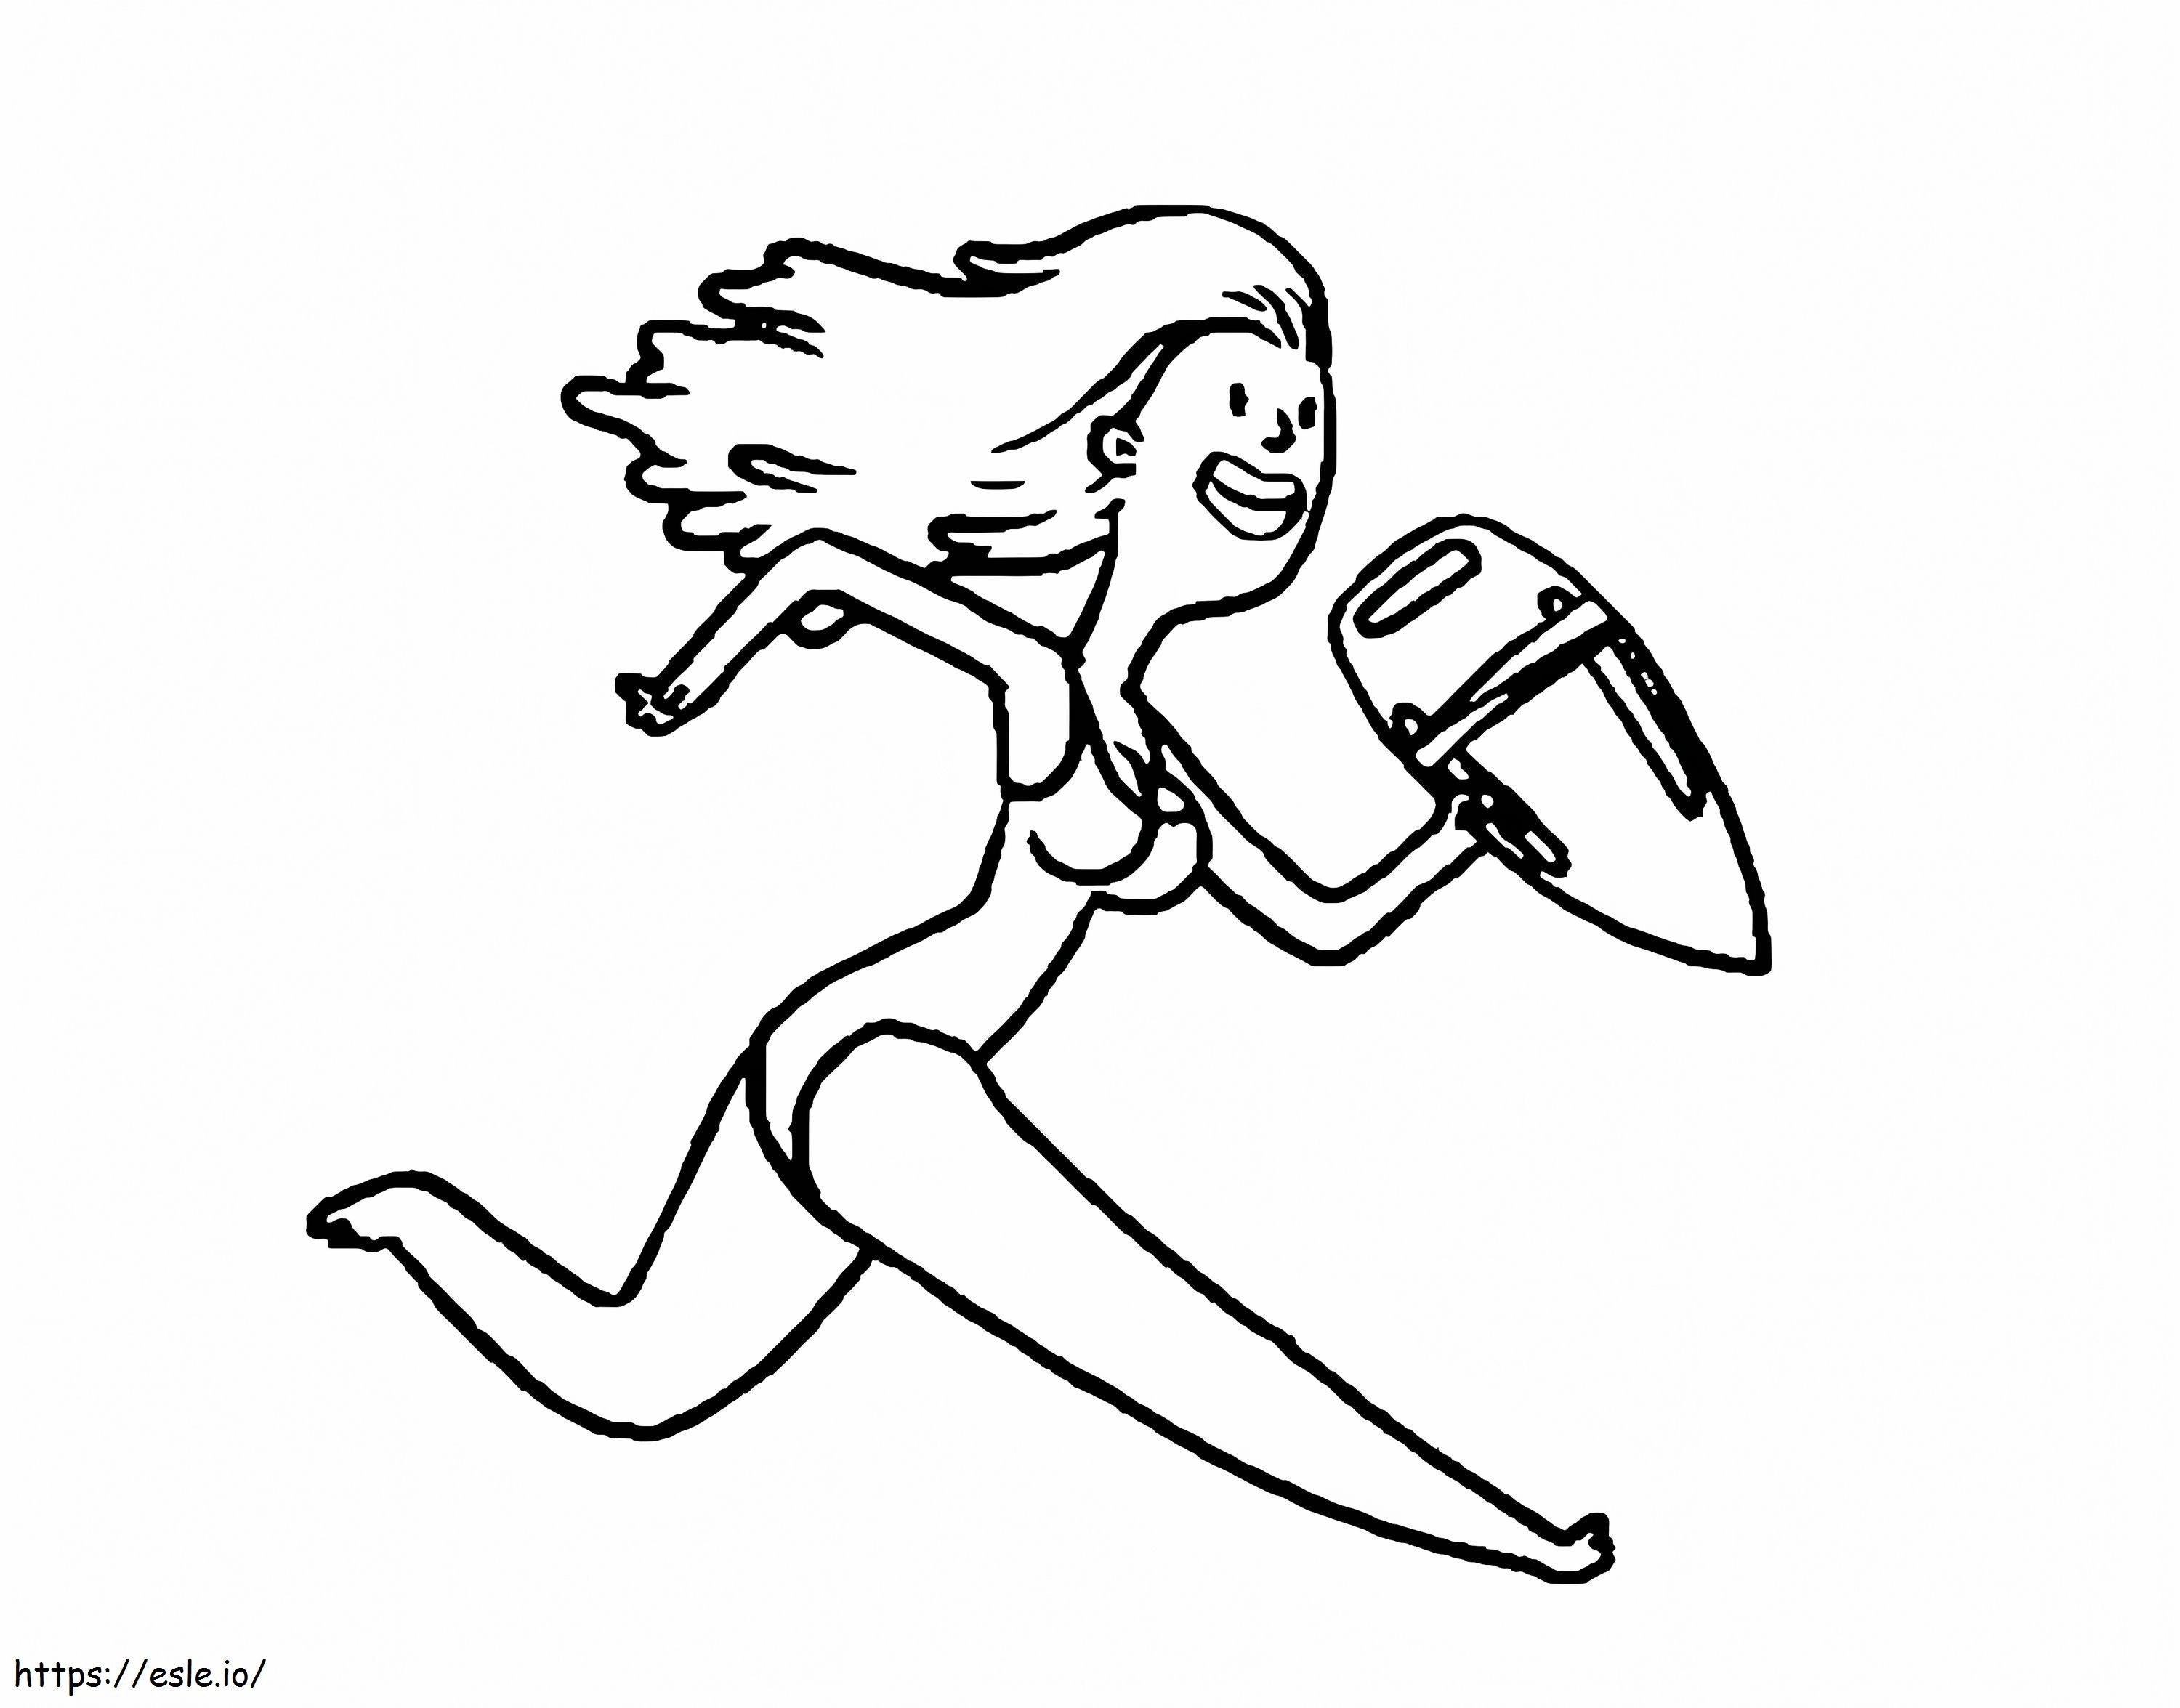 Lifeguard Is Running coloring page